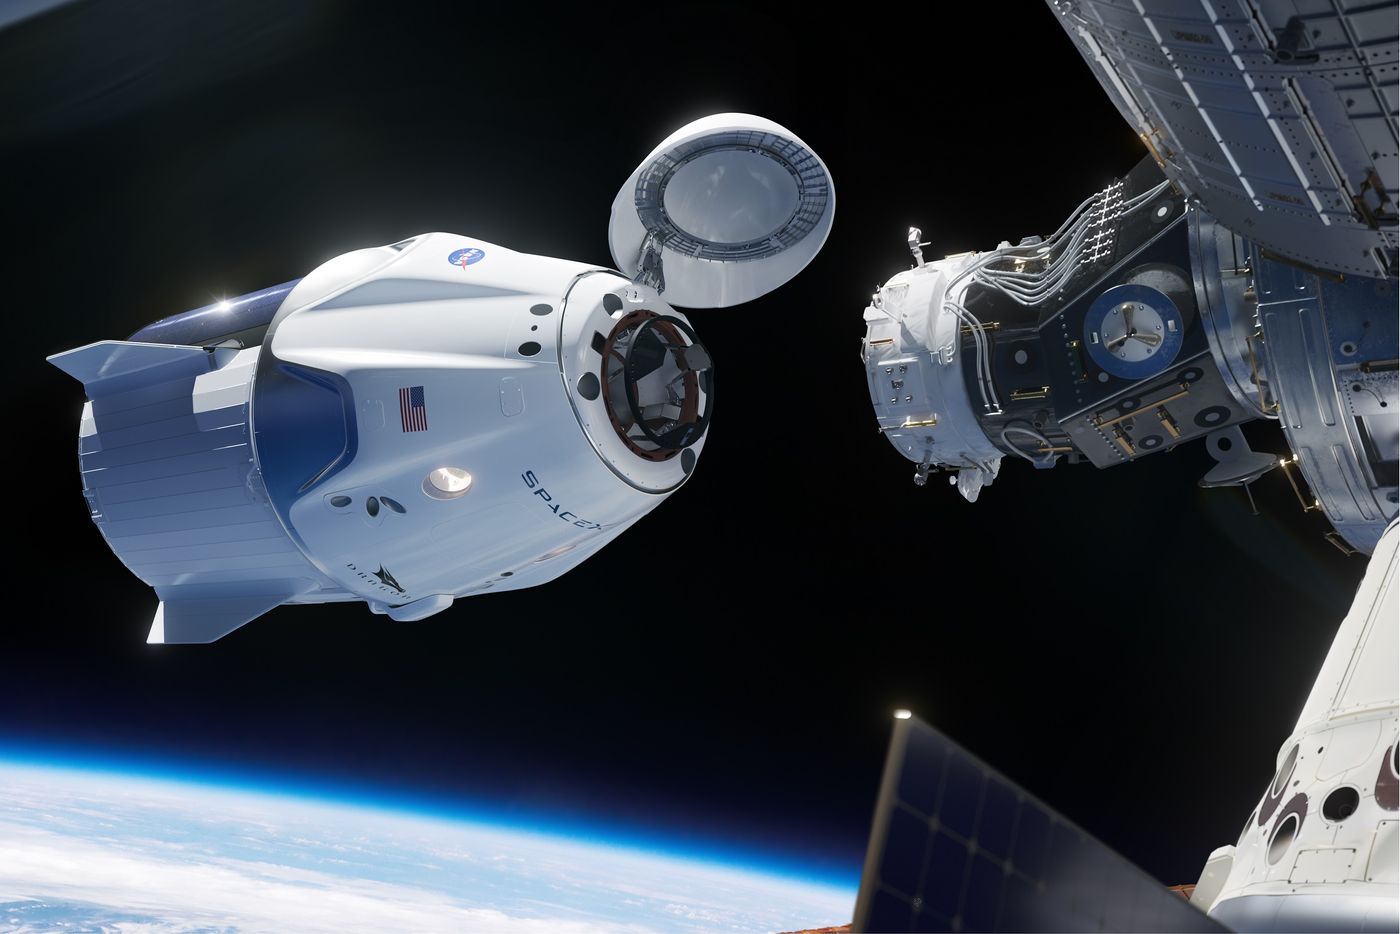 An artist's impression of the SpaceX Crew Dragon capsule approaching the International Space Station's docking region.